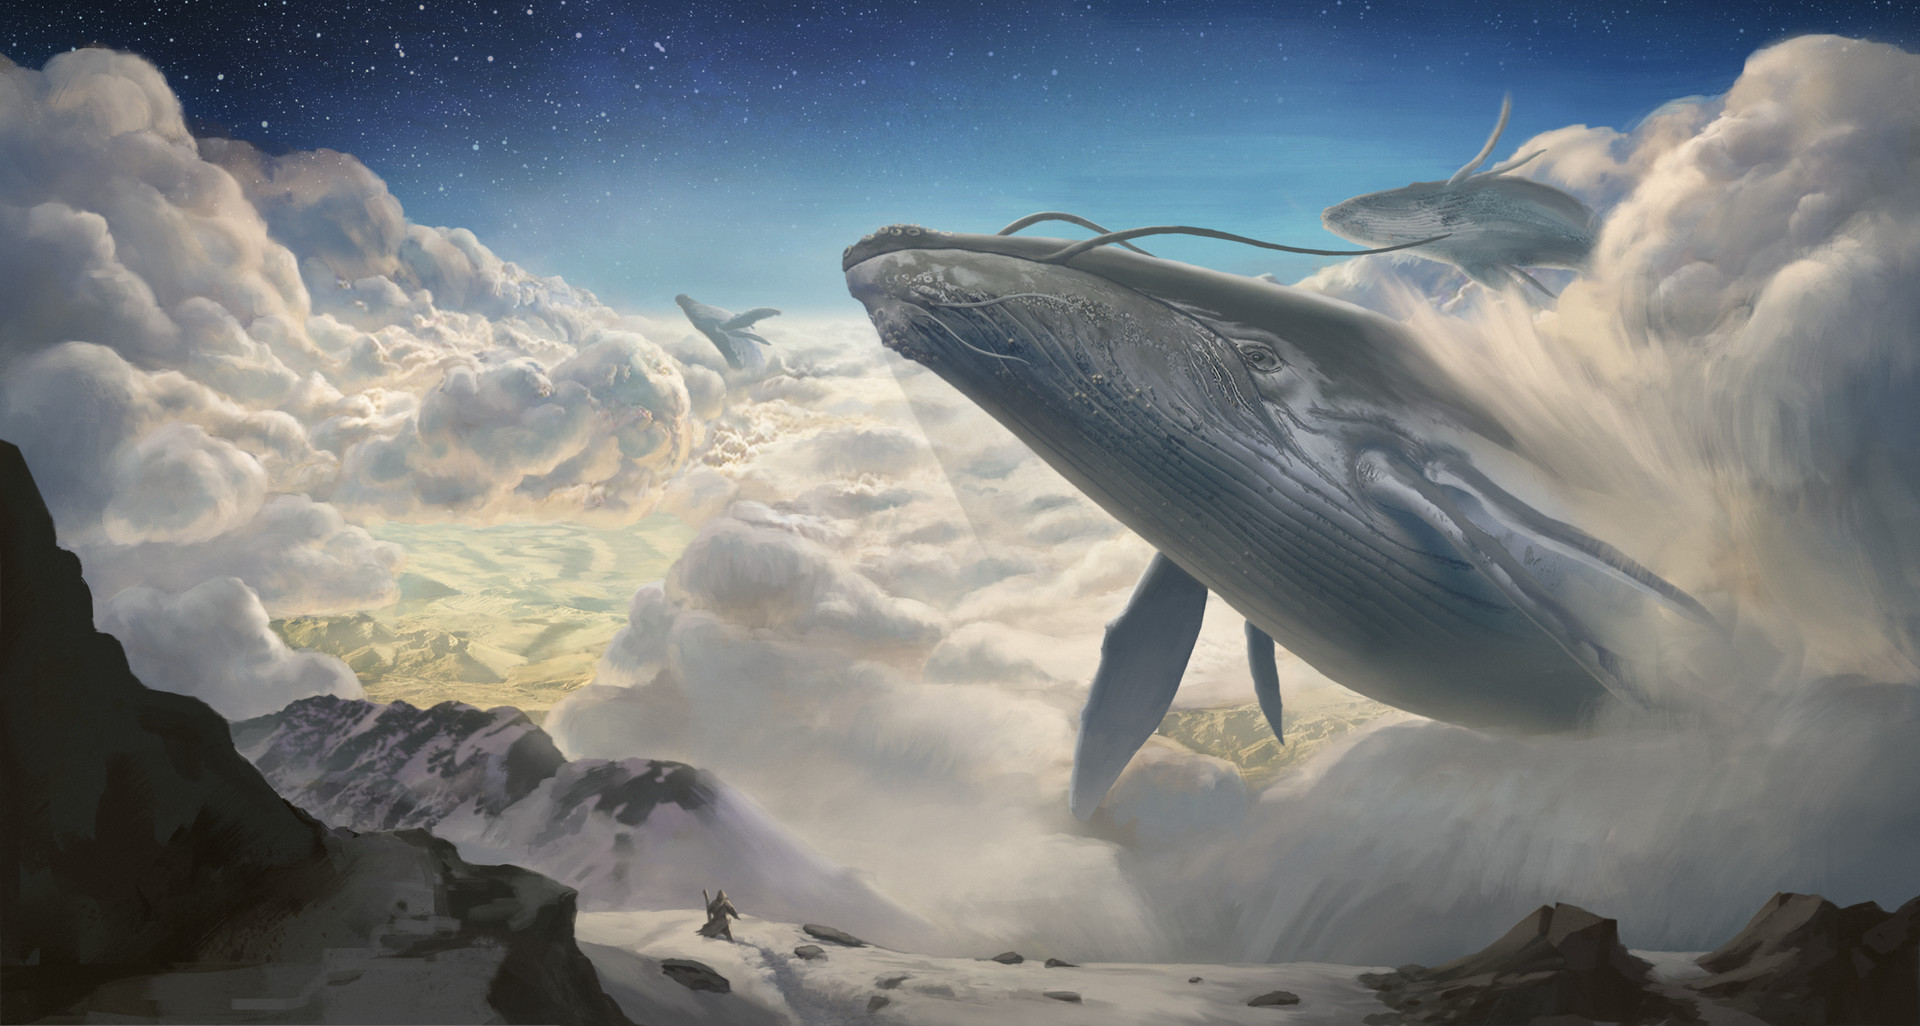 General 1920x1026 artwork fantasy art whale clouds mountains stars flying Gojira flying whales